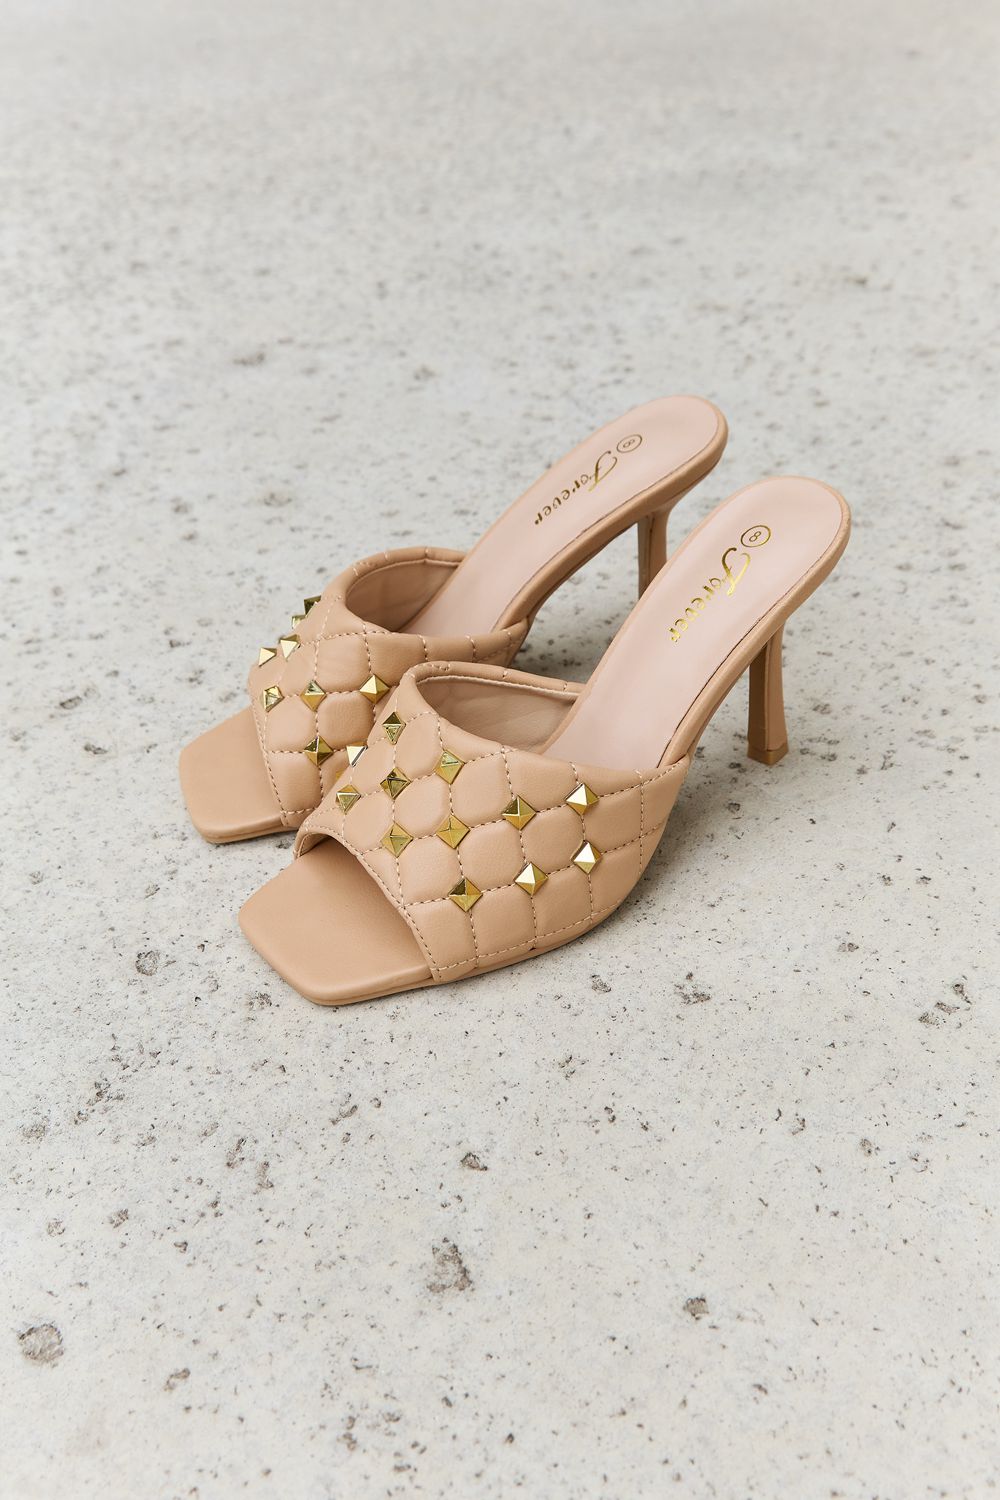 - Forever Link Square Toe Quilted Mule Heels in Nude - Ships from The USA - womens heels at TFC&H Co.